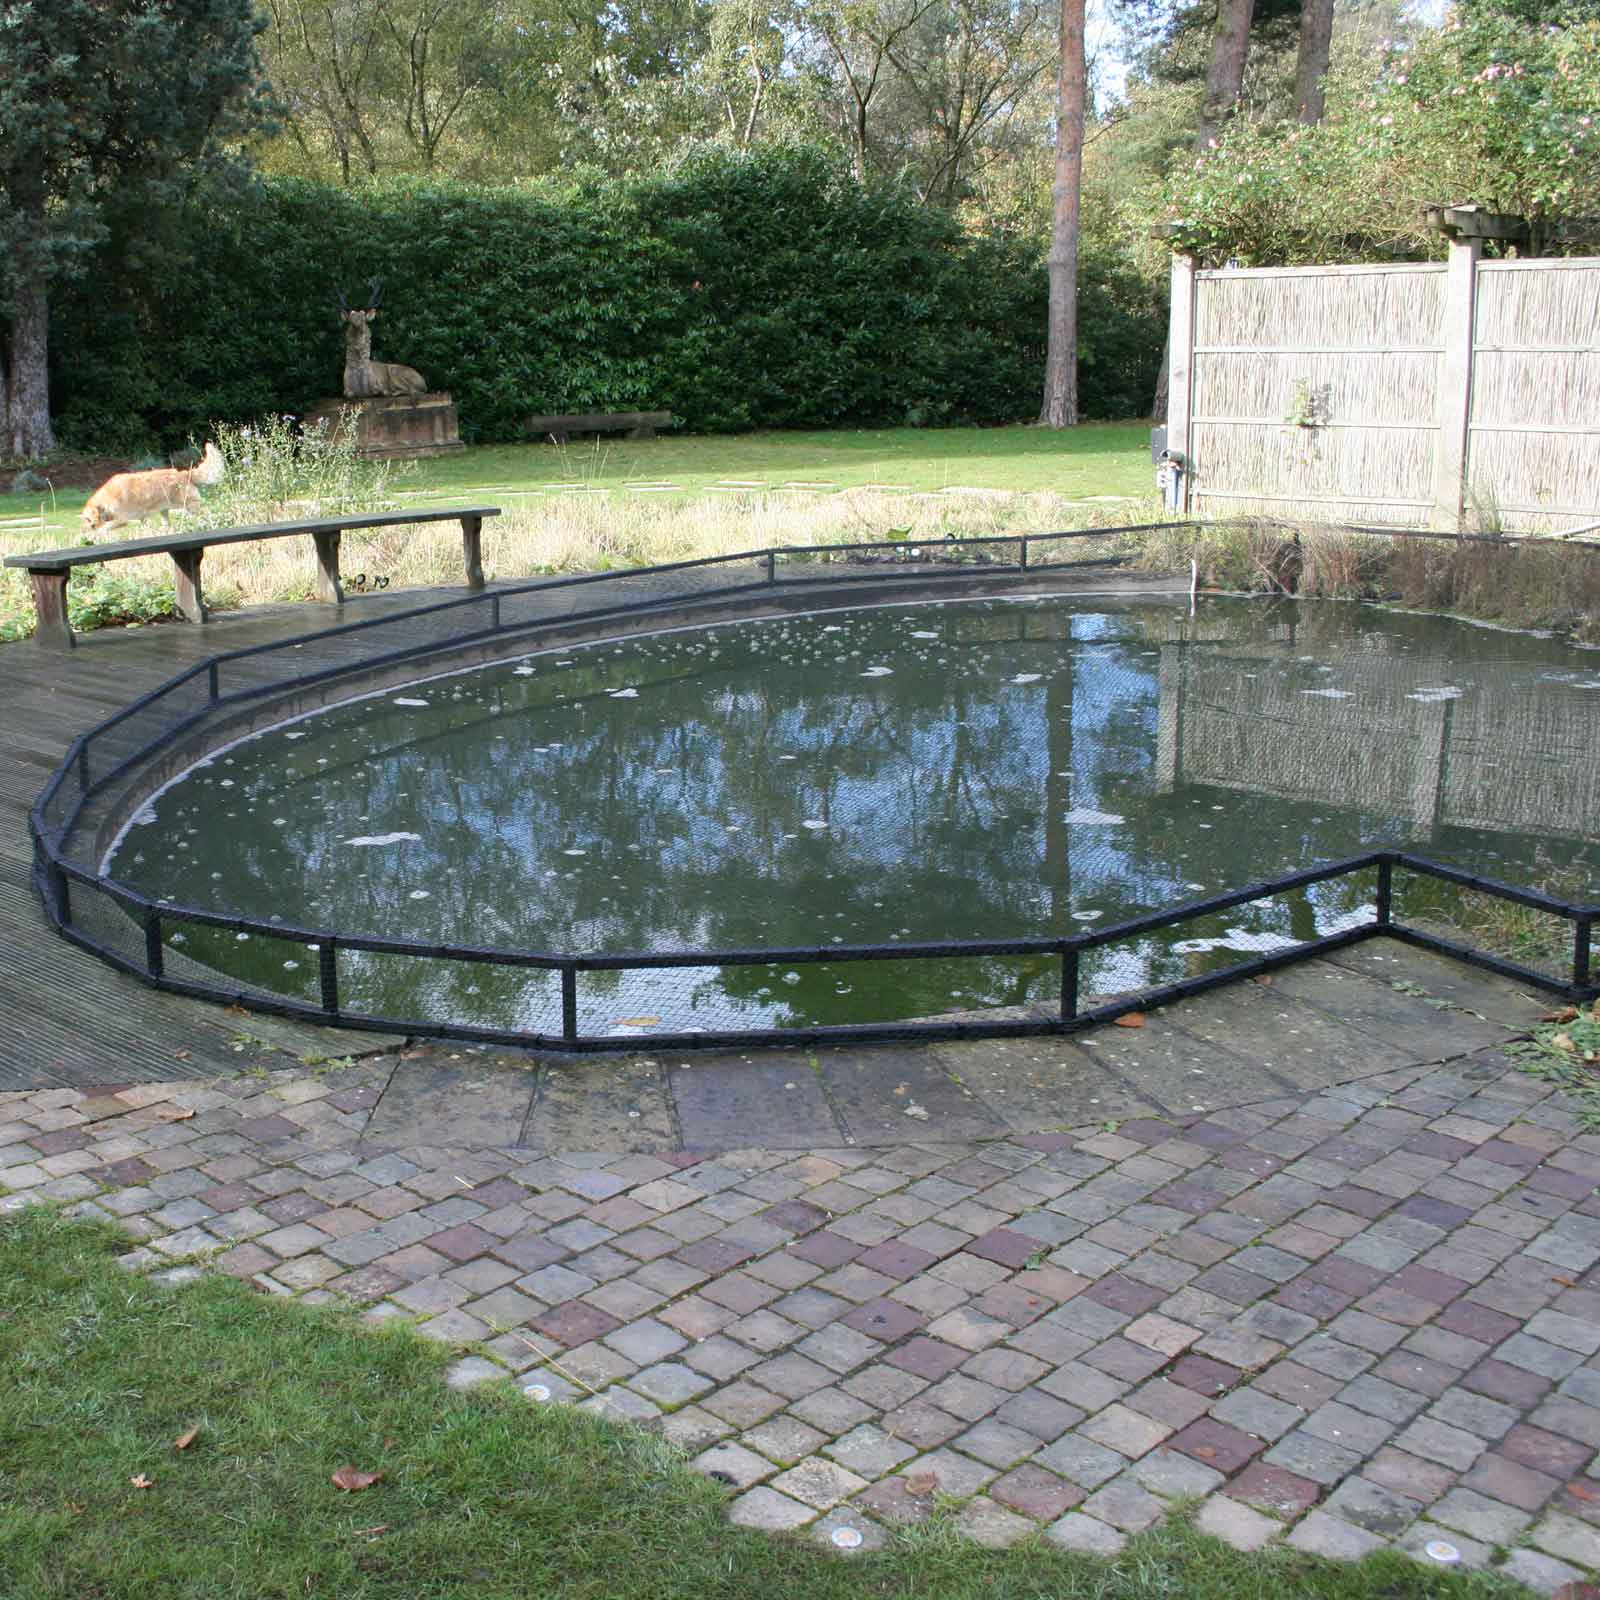 https://www.harrodhorticultural.com/uploads/images/products/GDN-754_Build_Your_Own_Pond_Cover_1.jpg